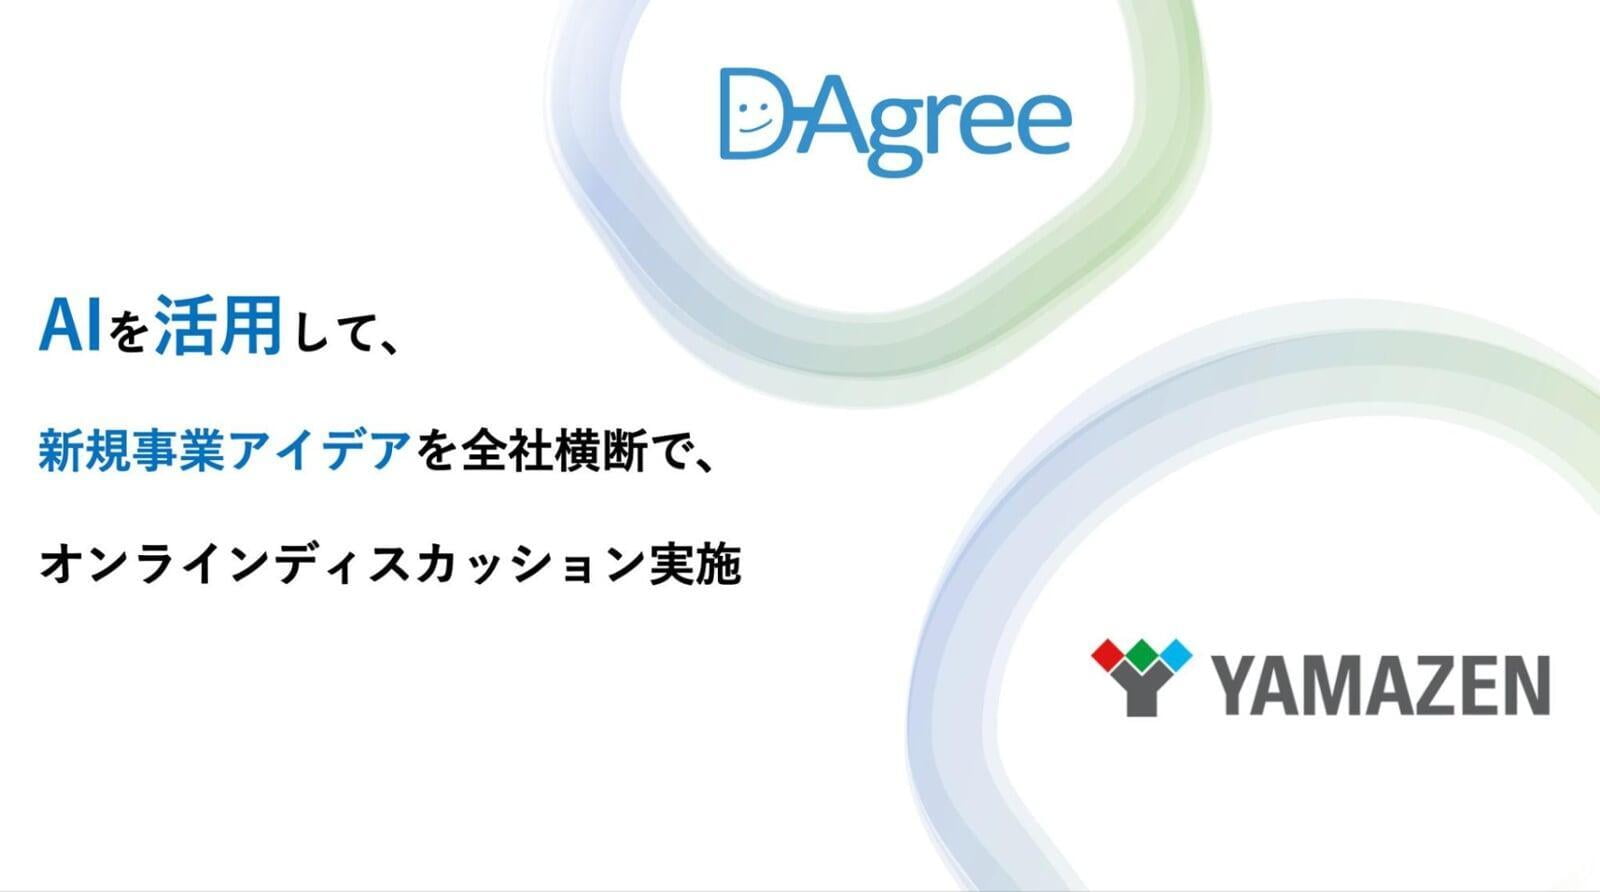 Yamazen Co., Ltd. holds a company-wide online discussion of new business ideas using D-Agree, which has AI facilitation and AI classification functions.